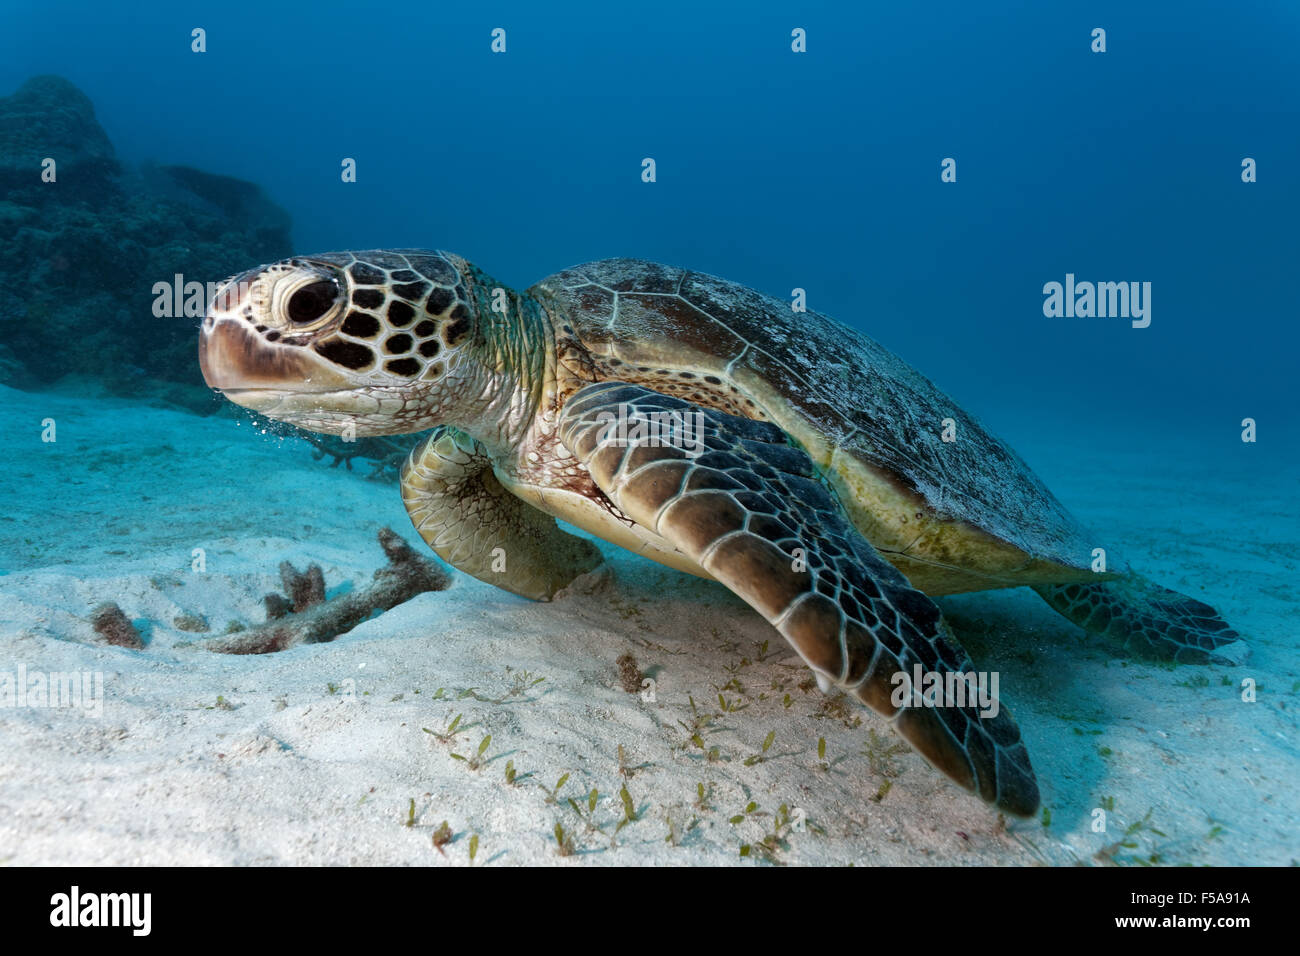 Green sea turtle (Chelonia mydas) on sandy seabed, Great Barrier Reef, UNESCO World Heritage Site, Pacific, Australia Stock Photo